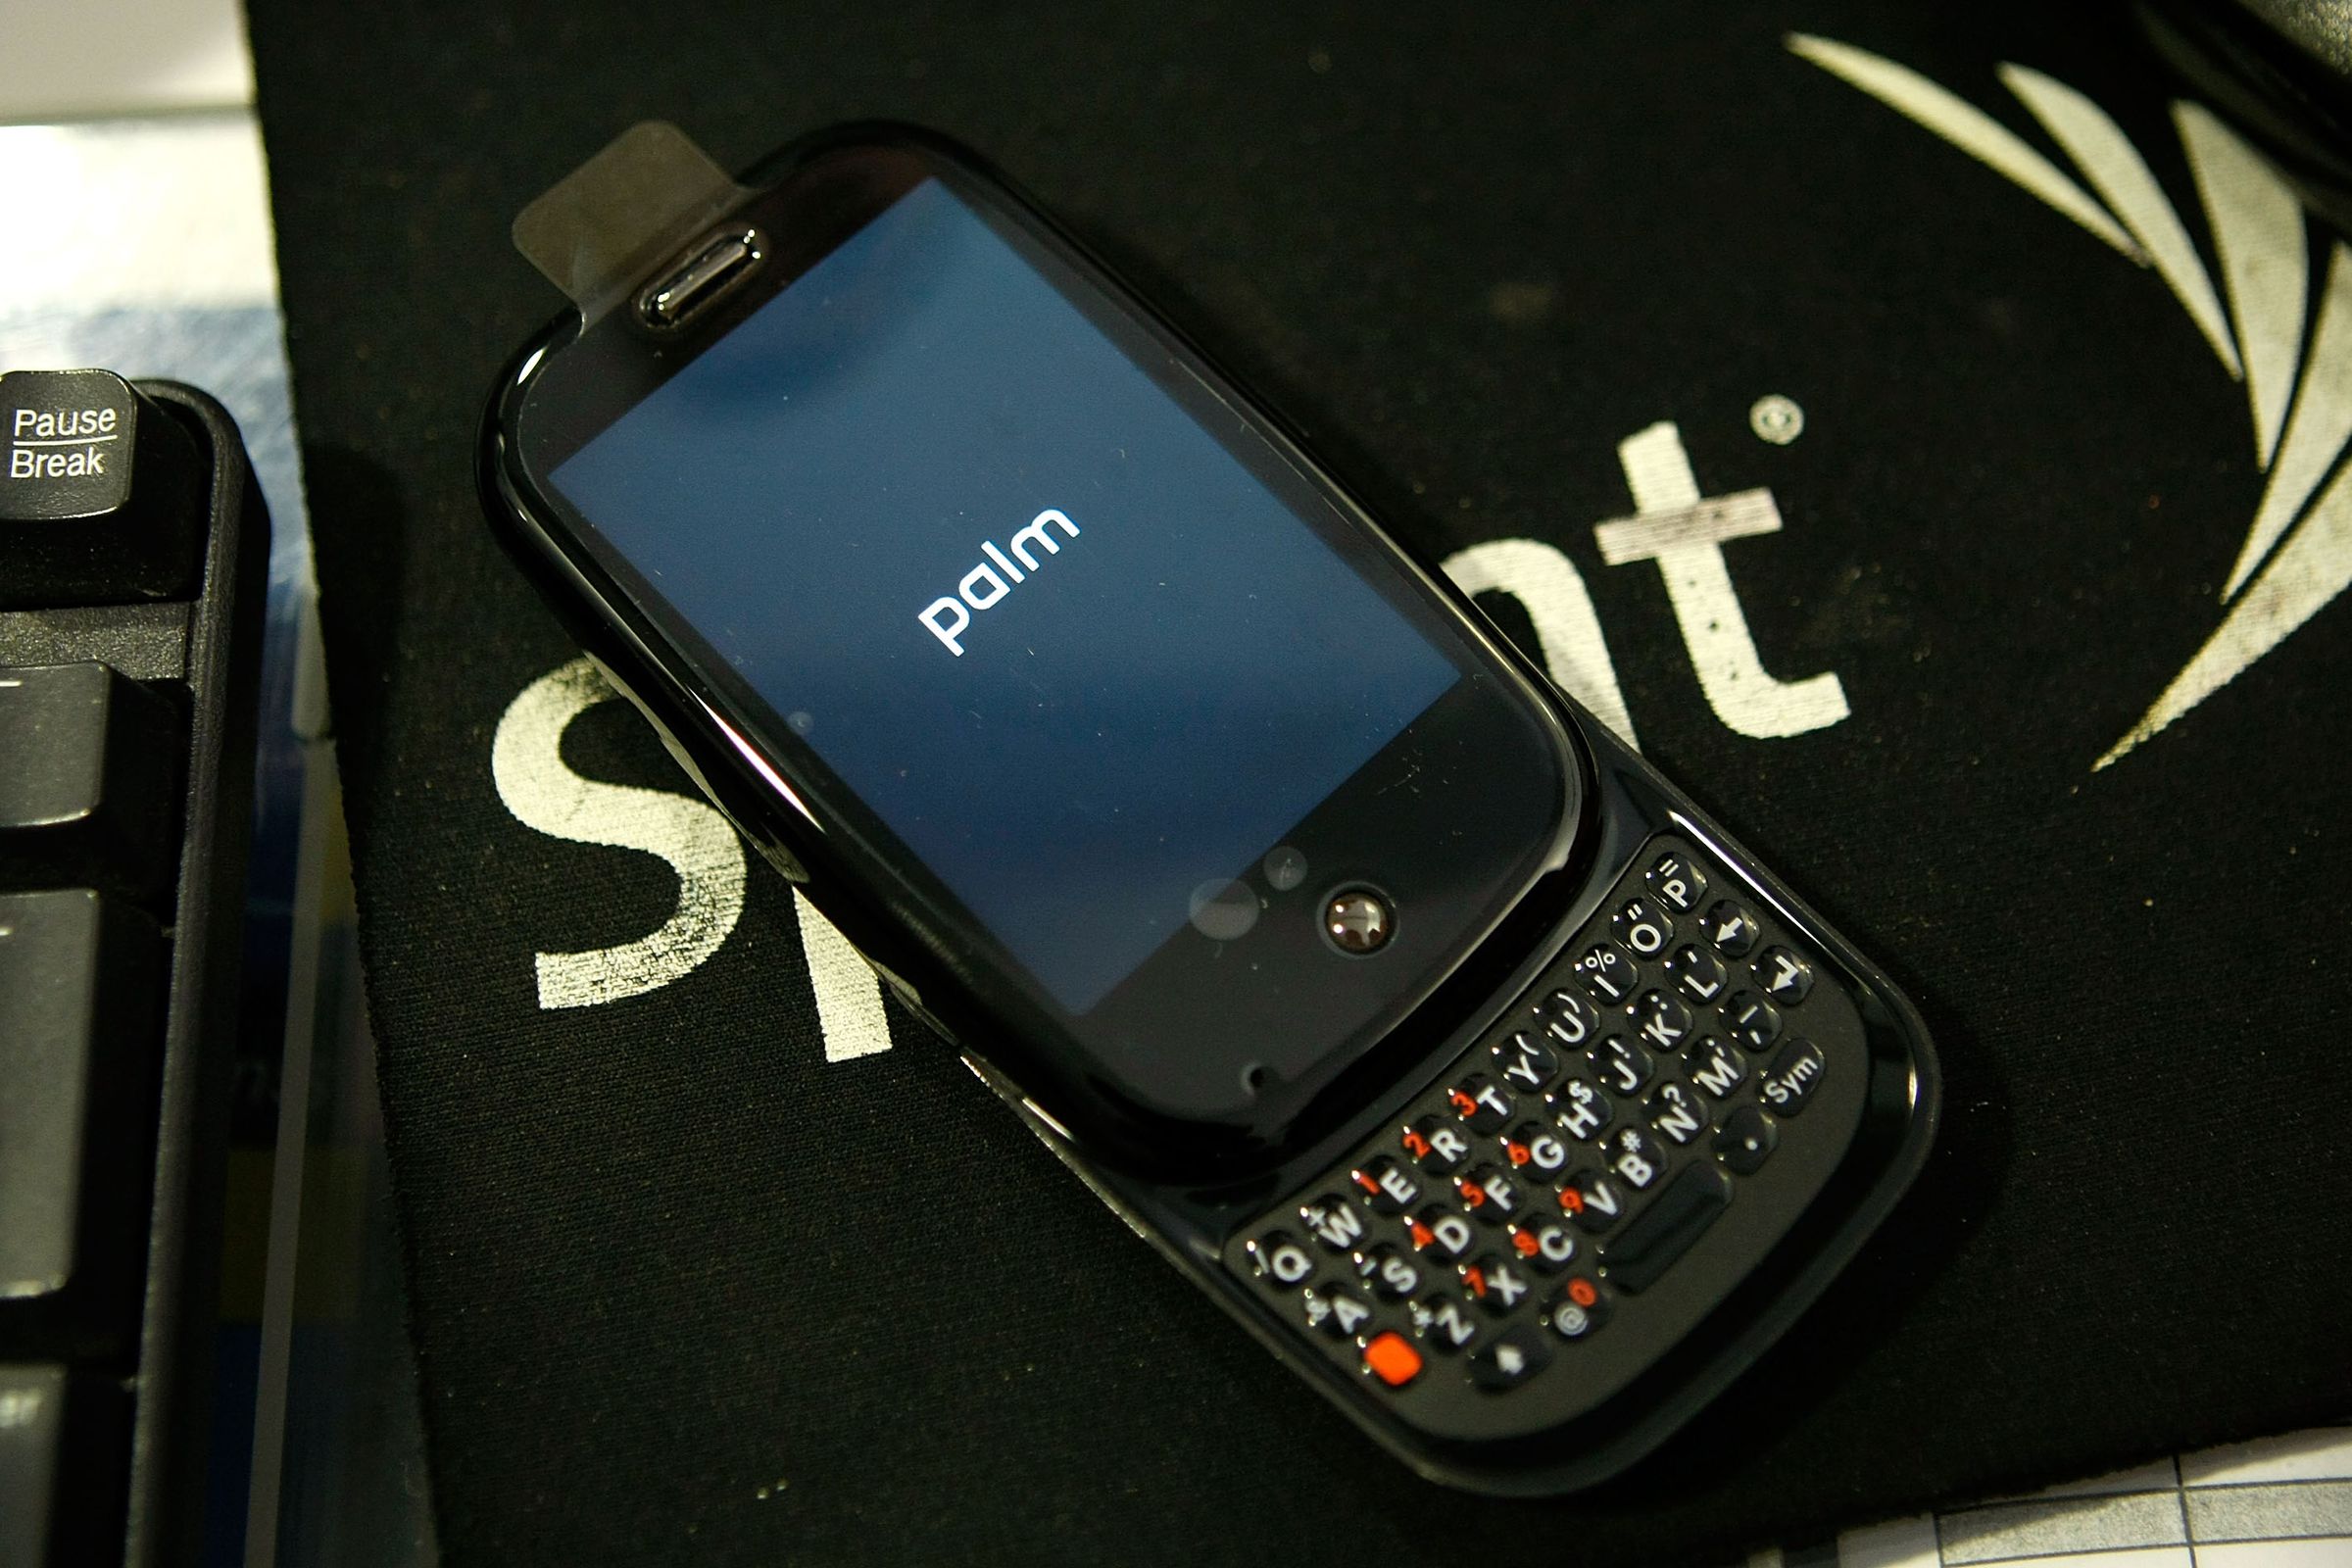 Palm’s New Smartphone Pre Goes On Sale